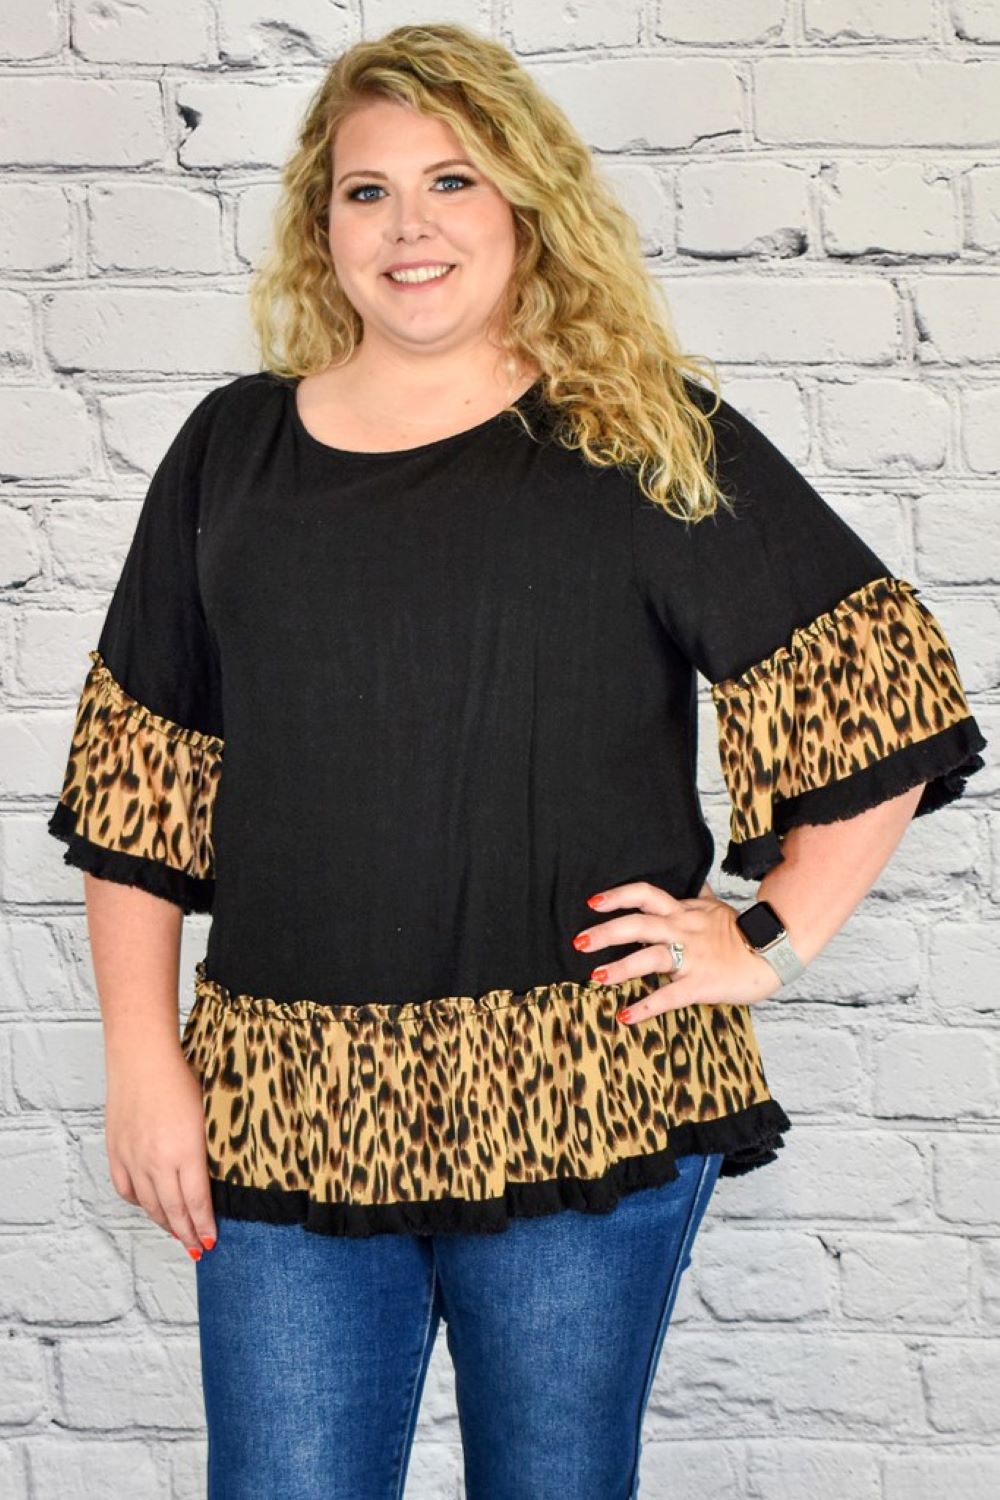 Black Tunic Top with Animal Print Ruffle Trim in Plus Size by Umgee Clothing